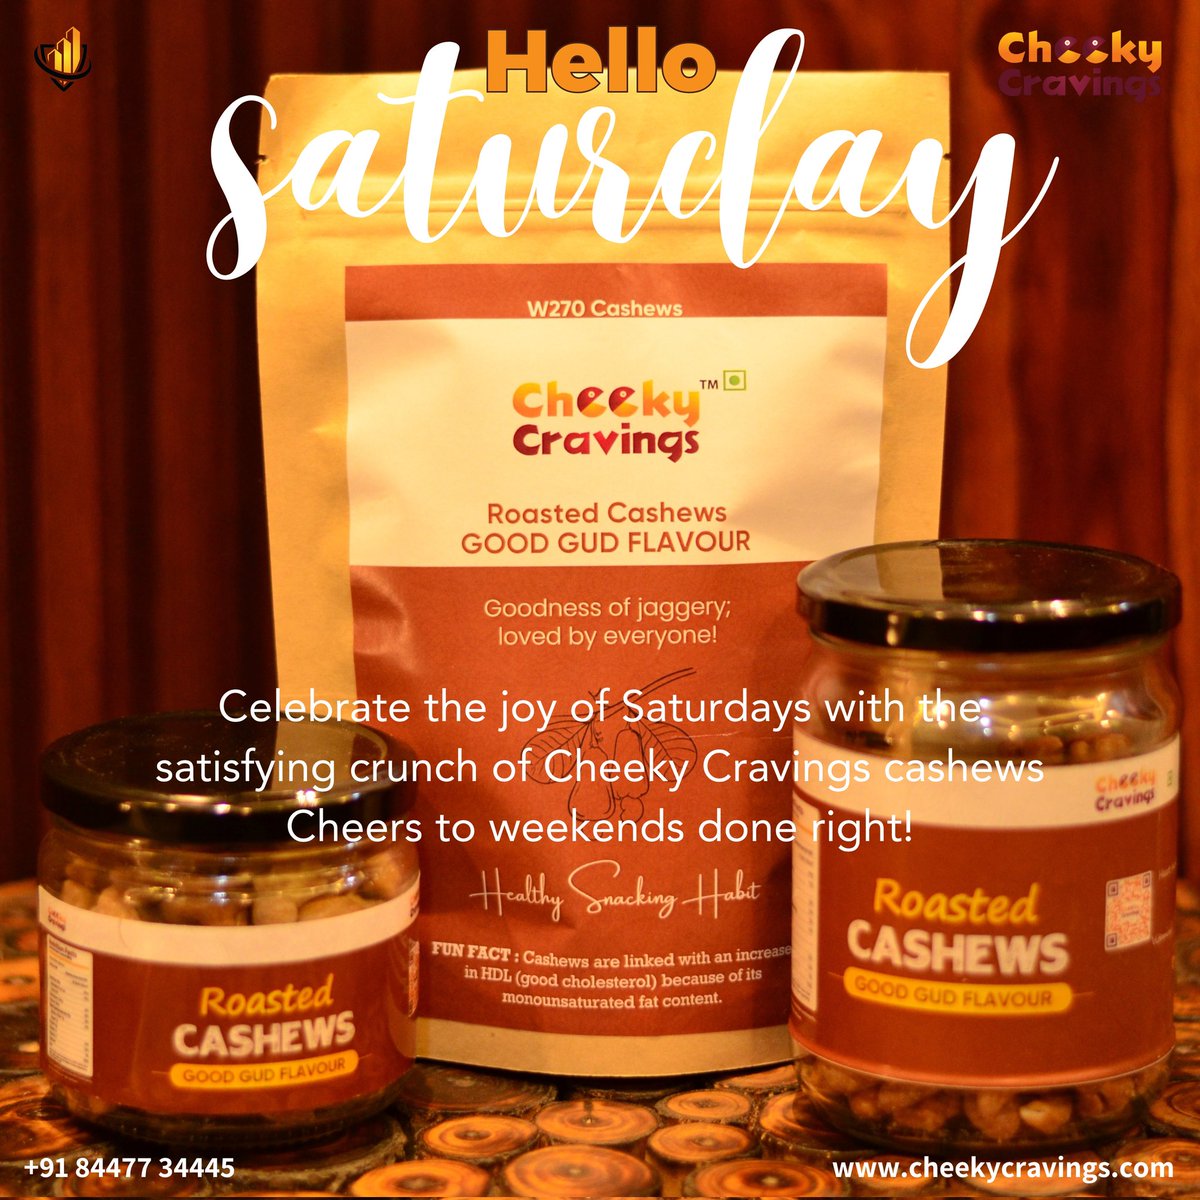 Indulge in the ultimate weekend delight with Cheeky Cravings cashews and your favorite beverage. Saturdays just got a whole lot tastier! 🌟🥂 #WeekendIndulgence #CheekyCravings #SaturdaysTasteBetter #CrunchyDelight #WeekendVibes #SnackTime #Cashews #RoastedCashews